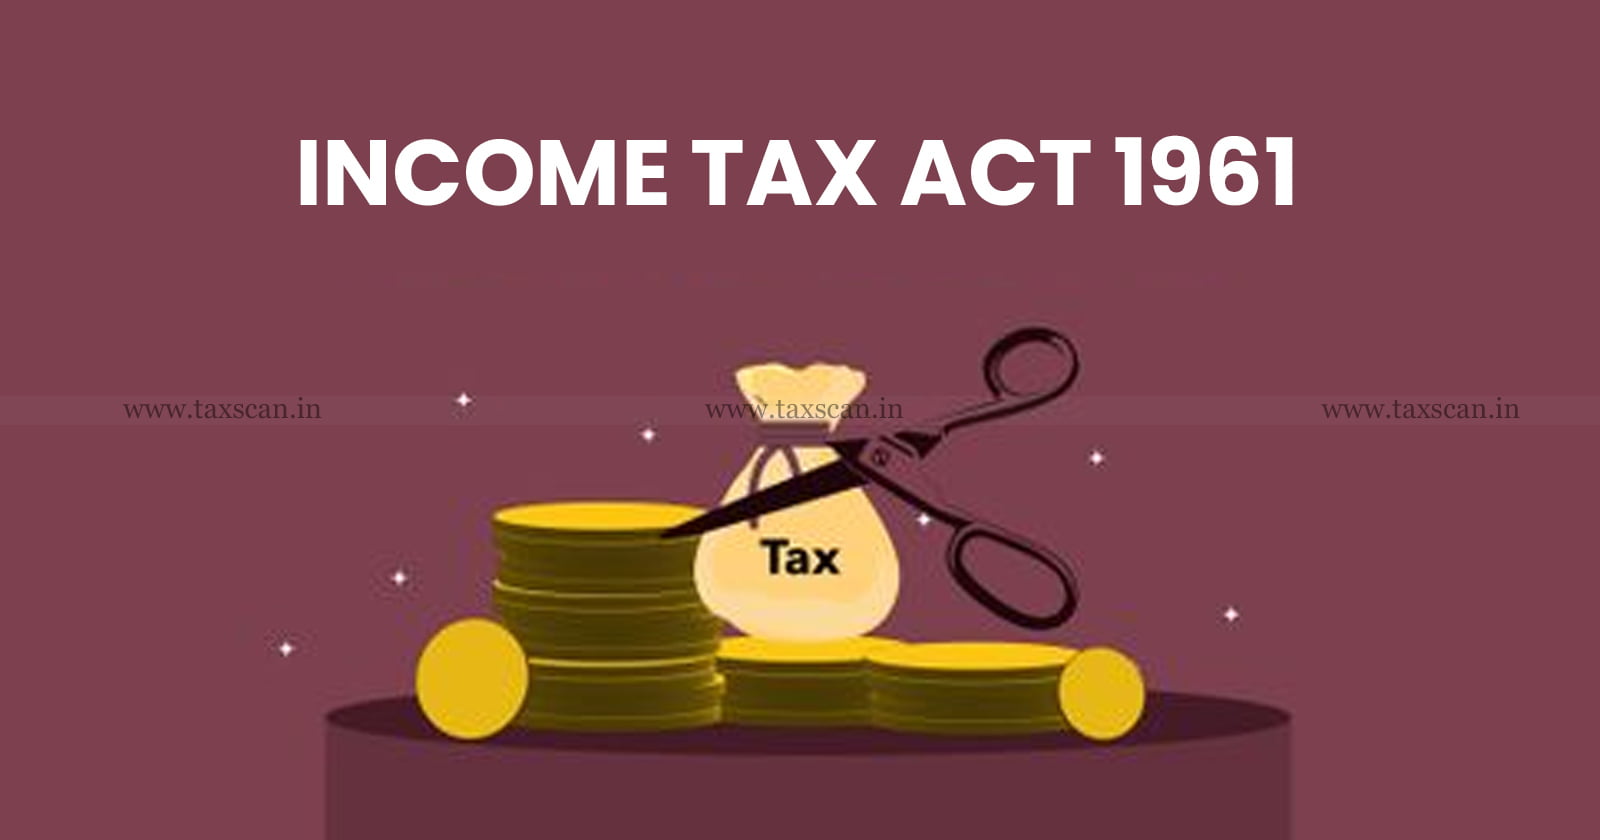 Income Tax Act 1961 - Income Tax Act - budget 2023 - union budget 2023 - nirmala sitharaman - budget 2023 india - union budget 2023 live - taxscan